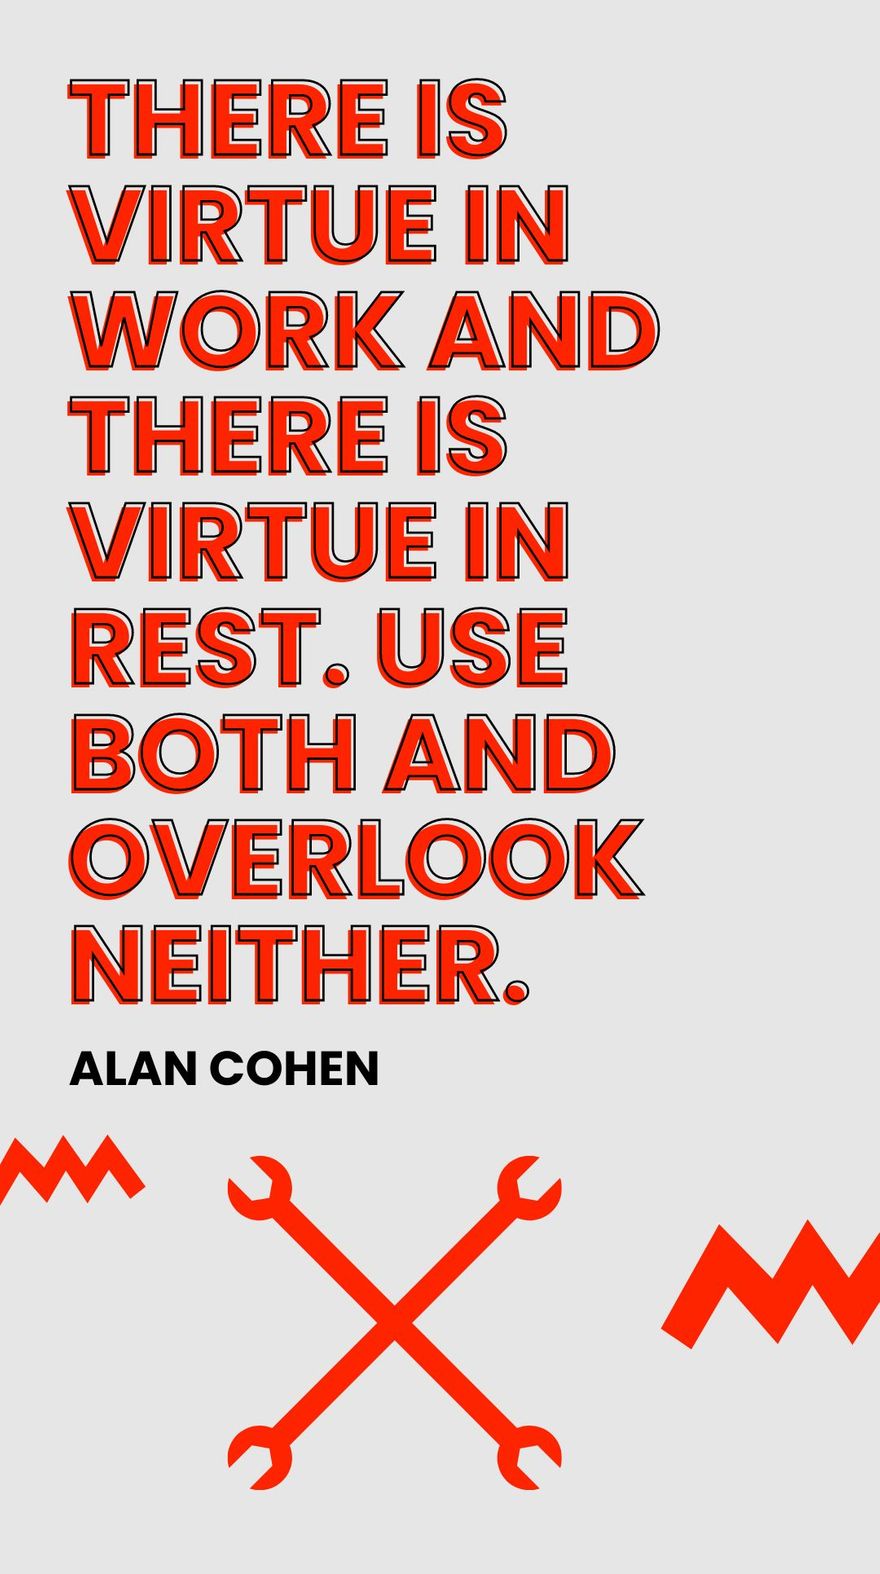 Free Alan Cohen - There is virtue in work and there is virtue in rest. Use both and overlook neither.